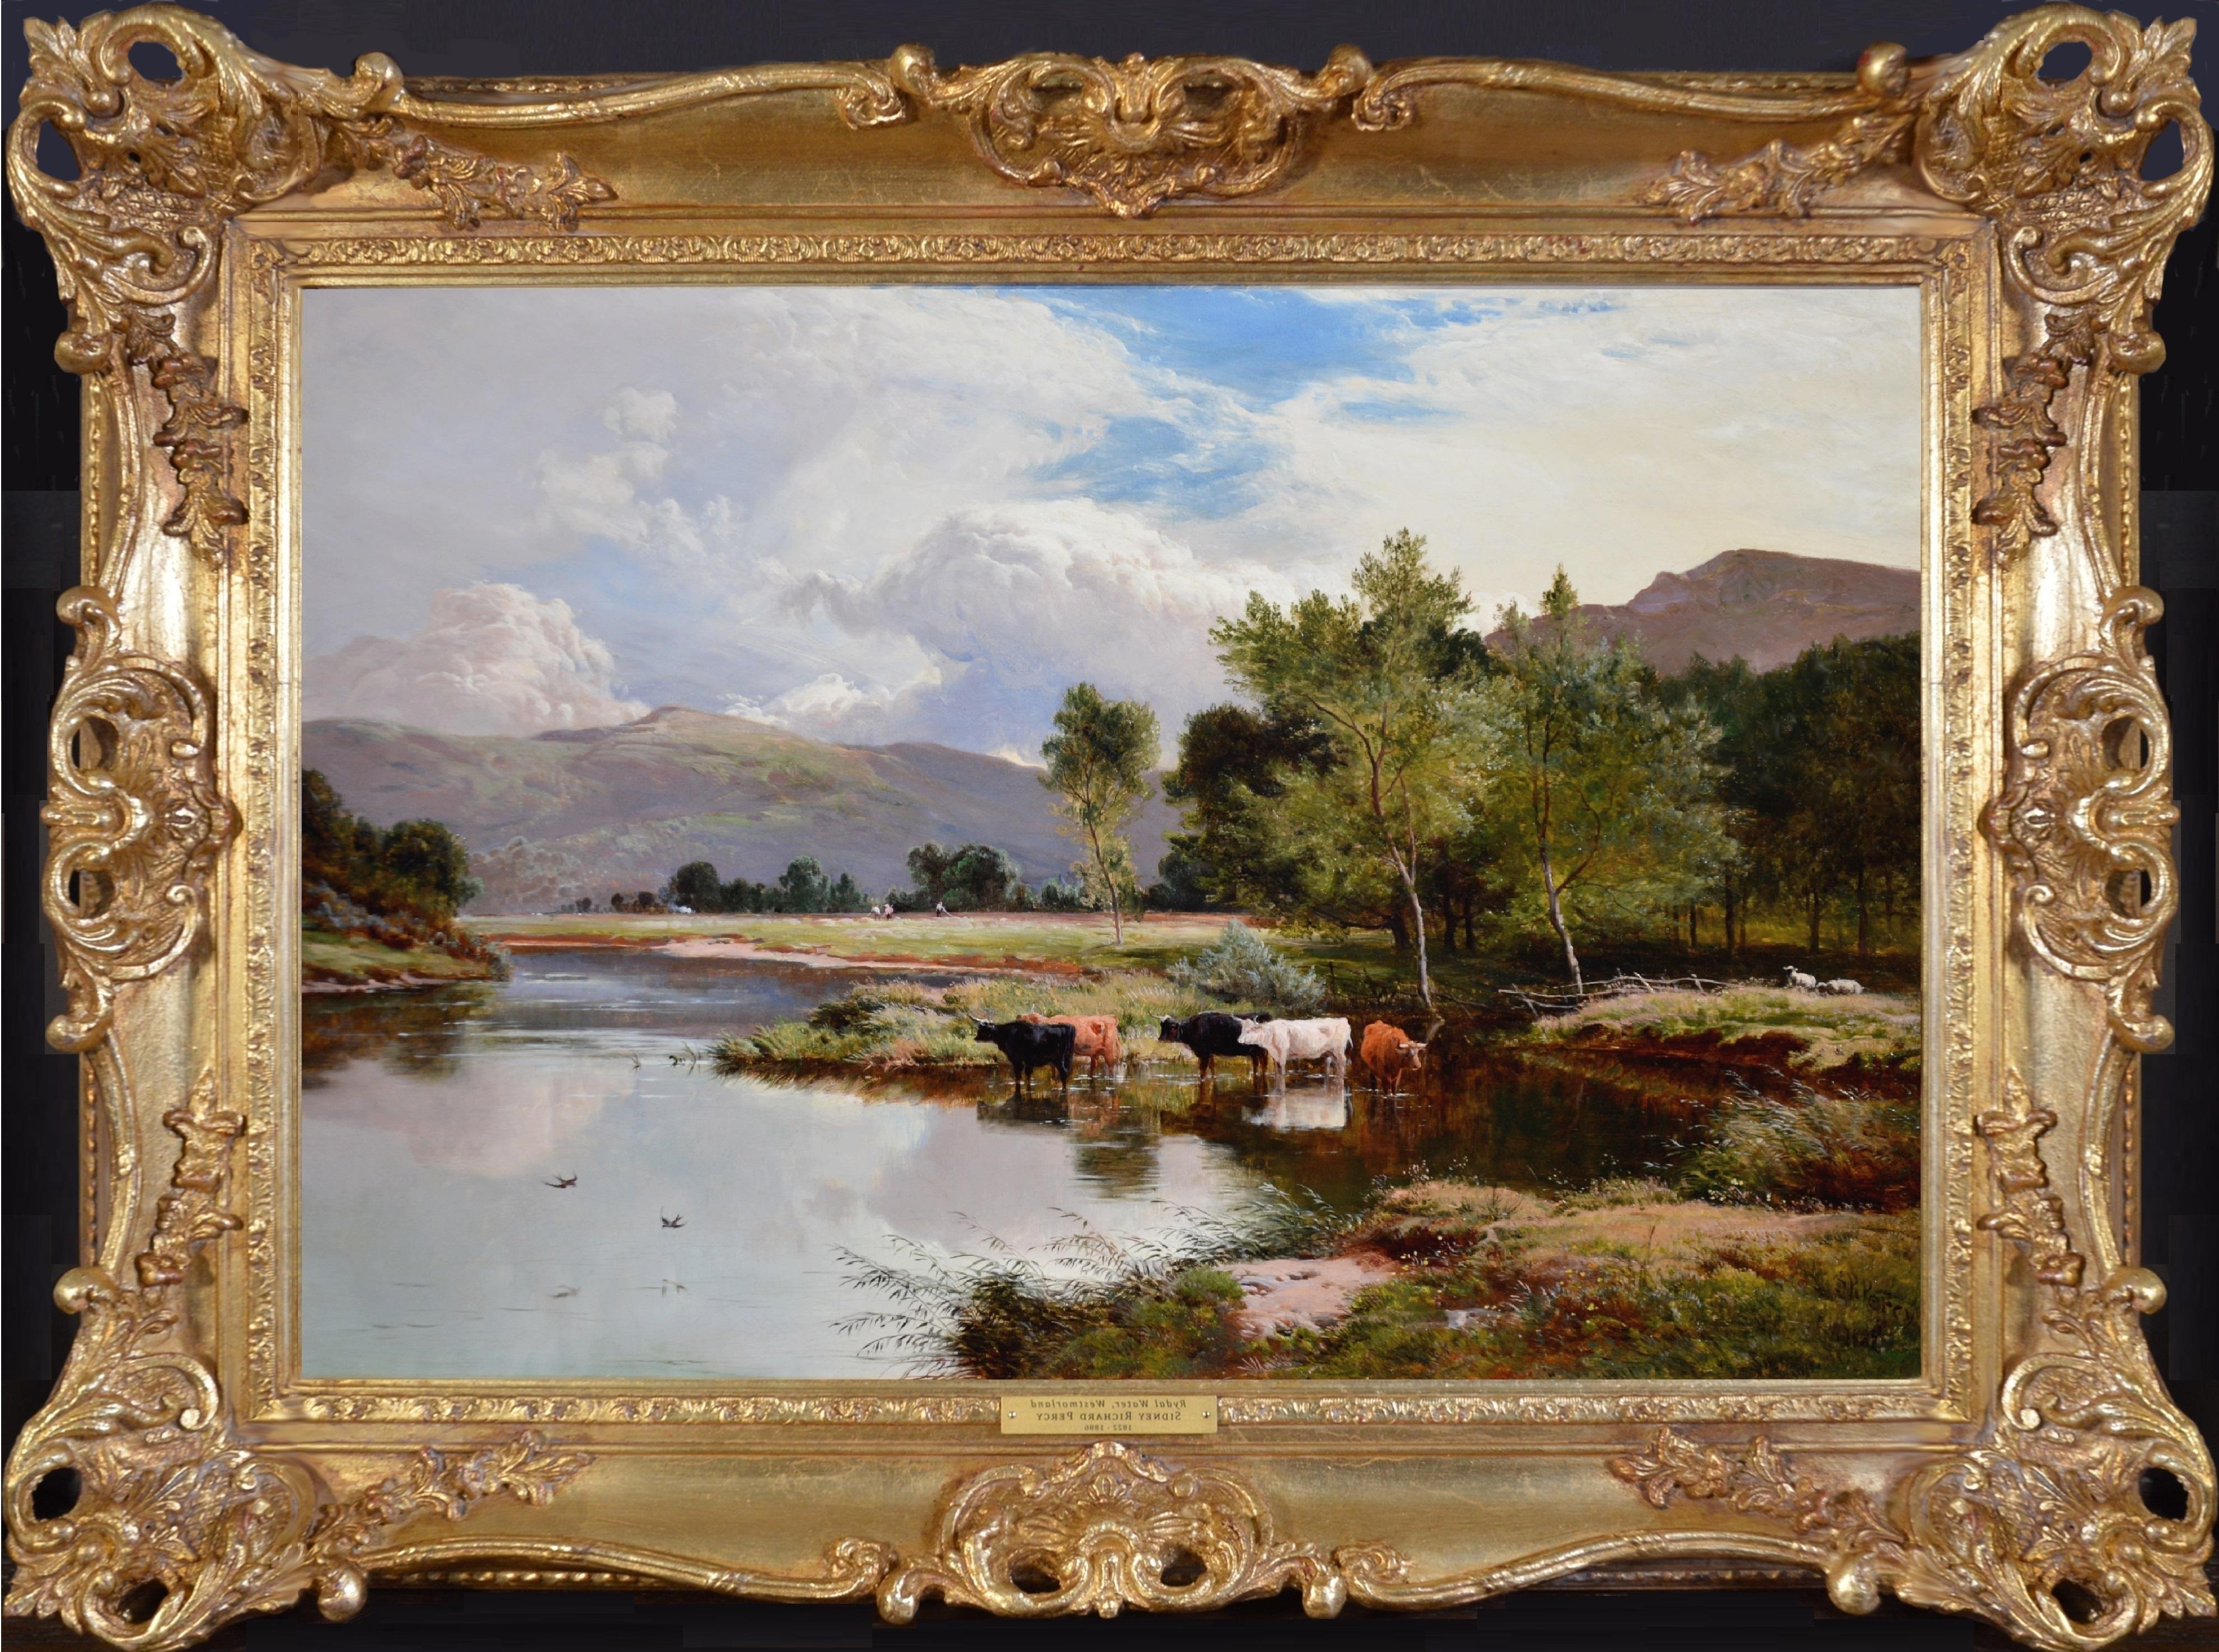 Sidney Richard Percy Landscape Painting - Rydal Water, Westmorland - 19th Century Oil Painting of English Lake District